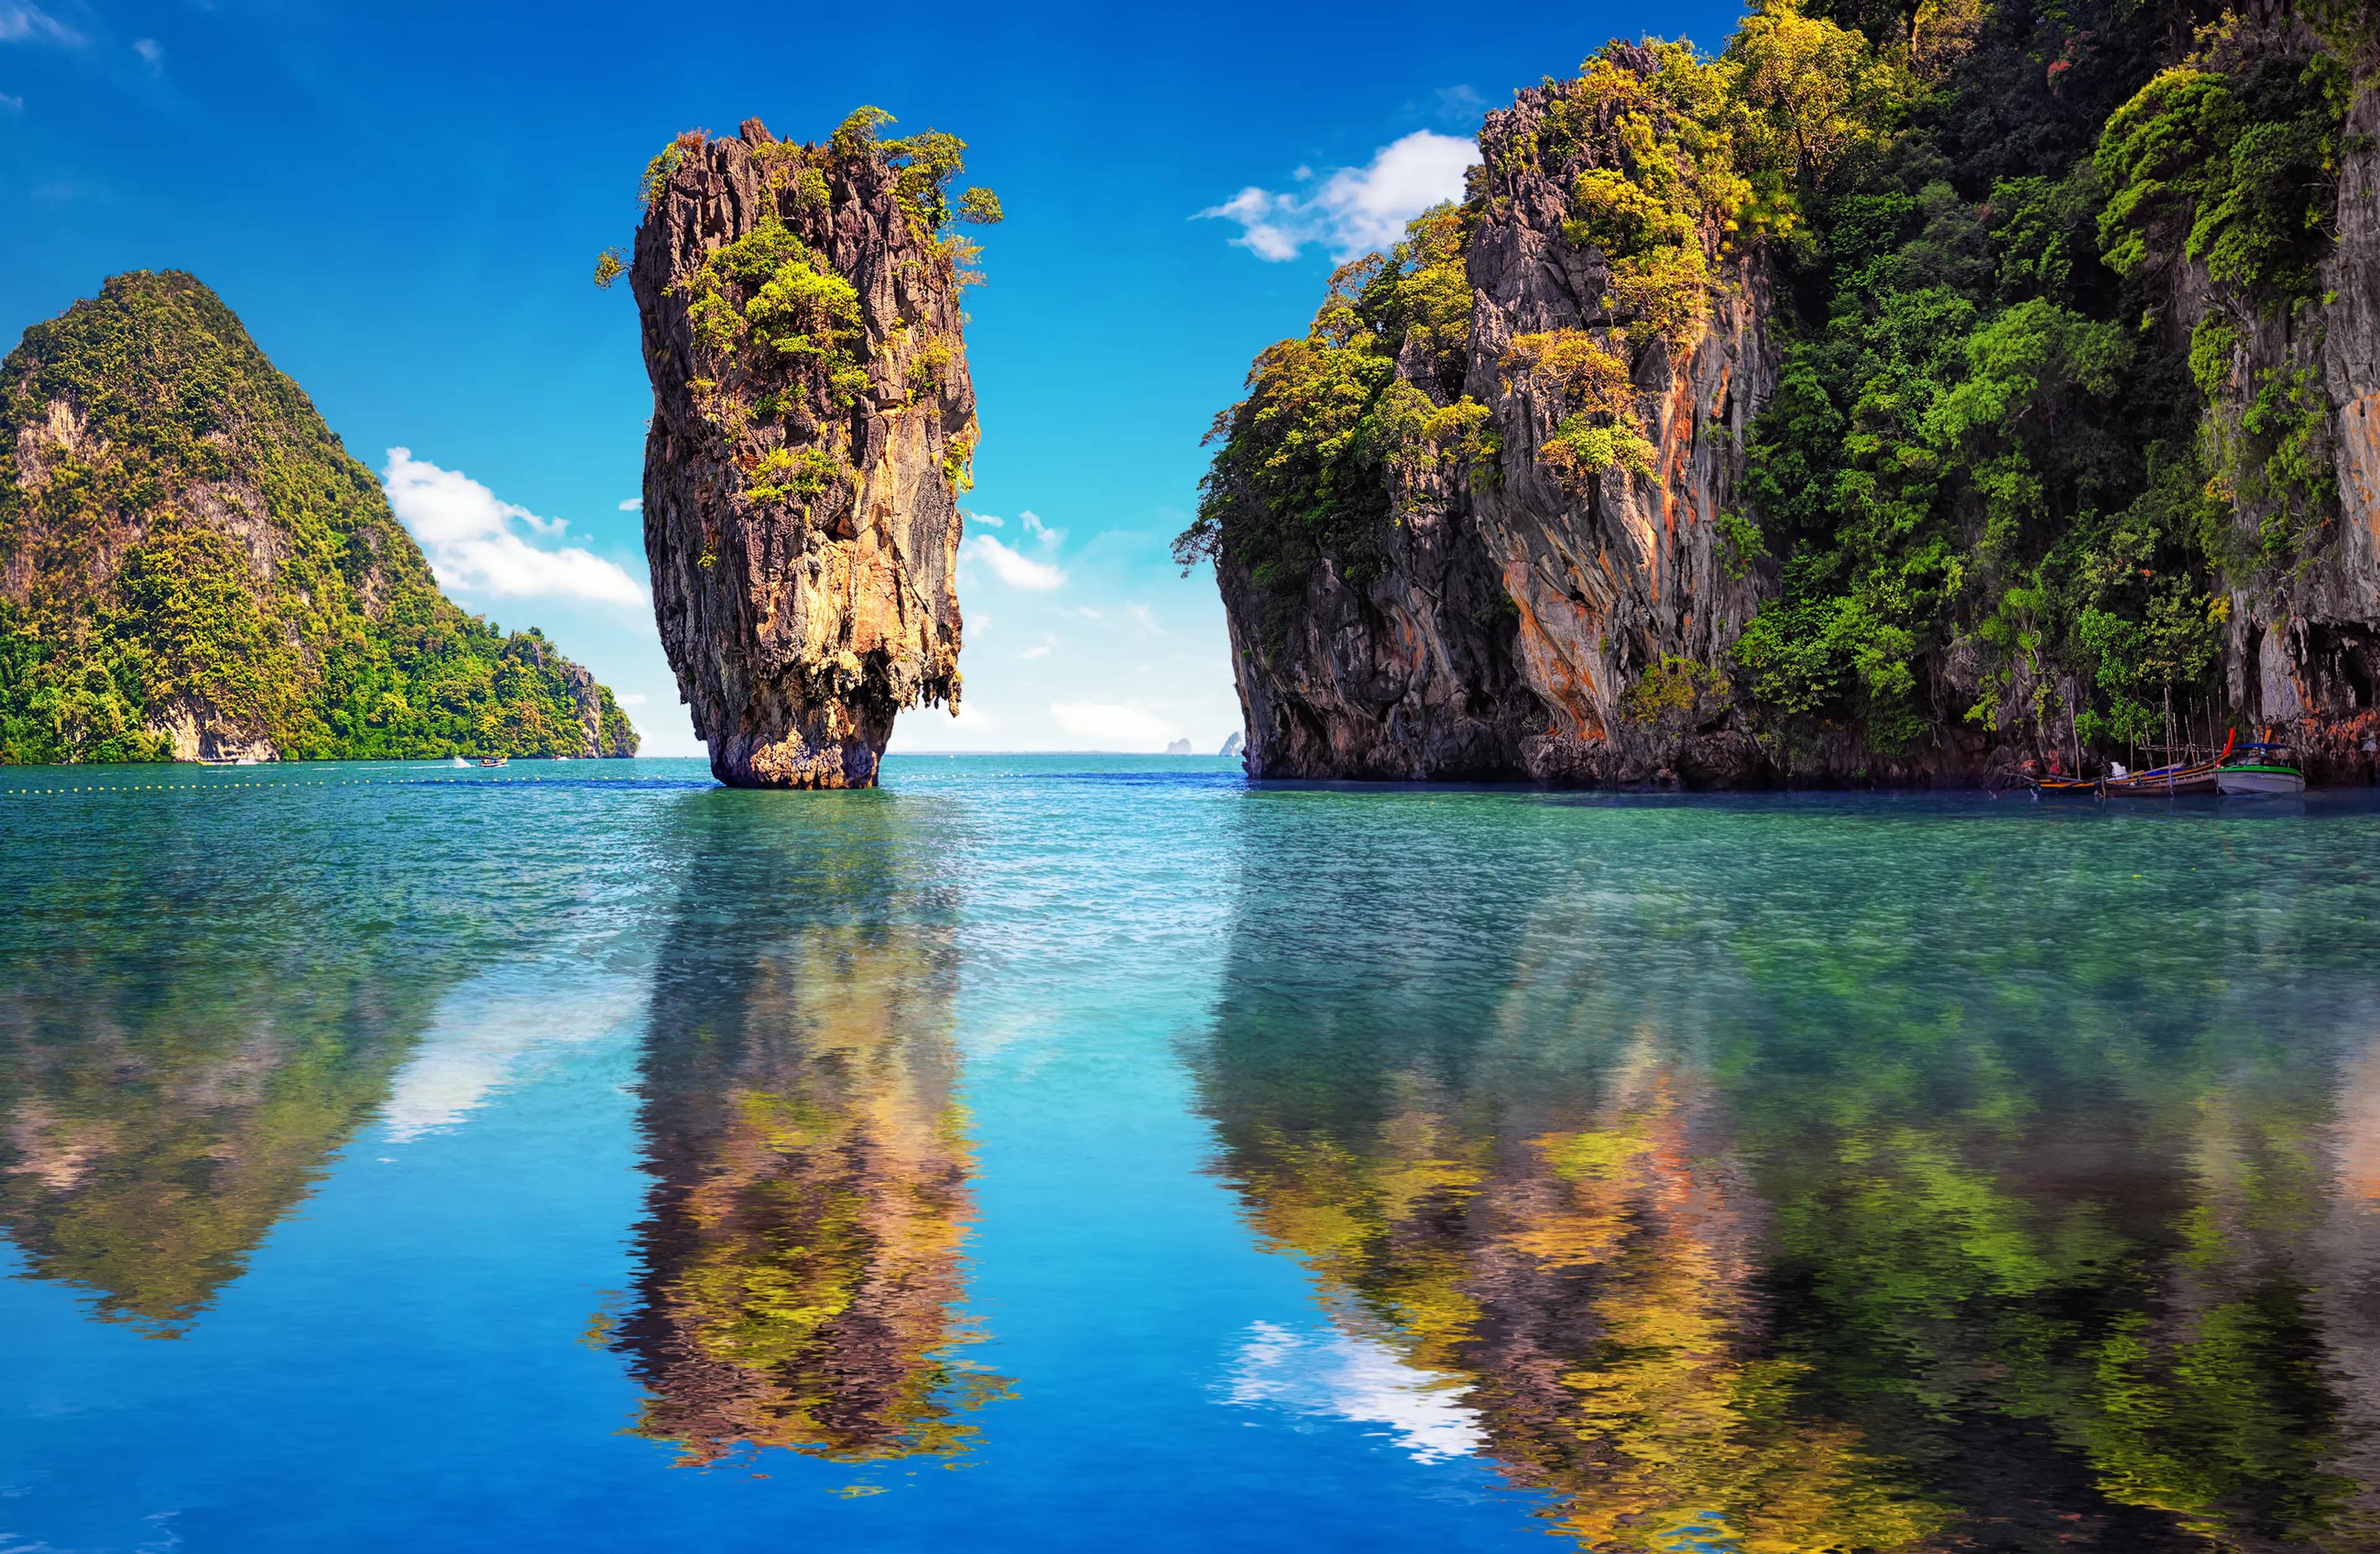 4-Day Solo Adventure: Undiscovered Phuket - Shopping and Relaxation